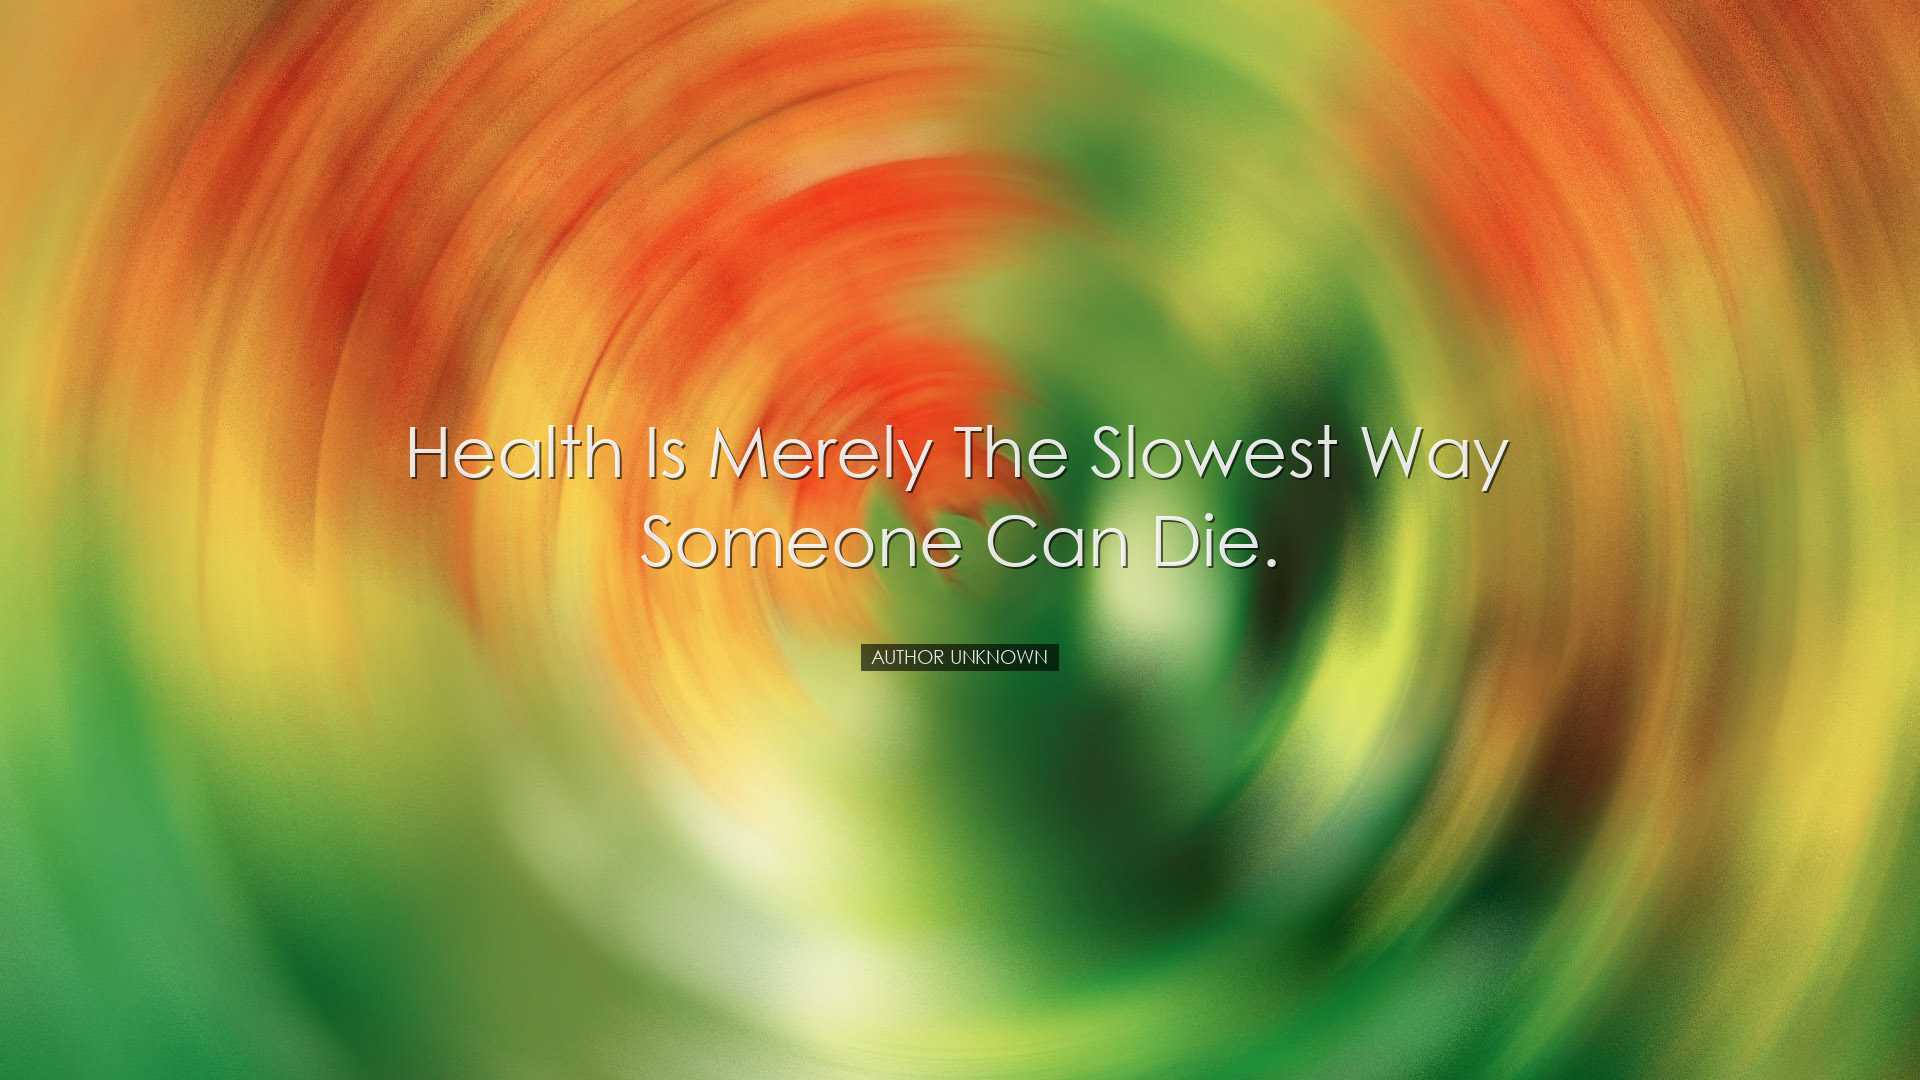 Health is merely the slowest way someone can die. - Author Unknown